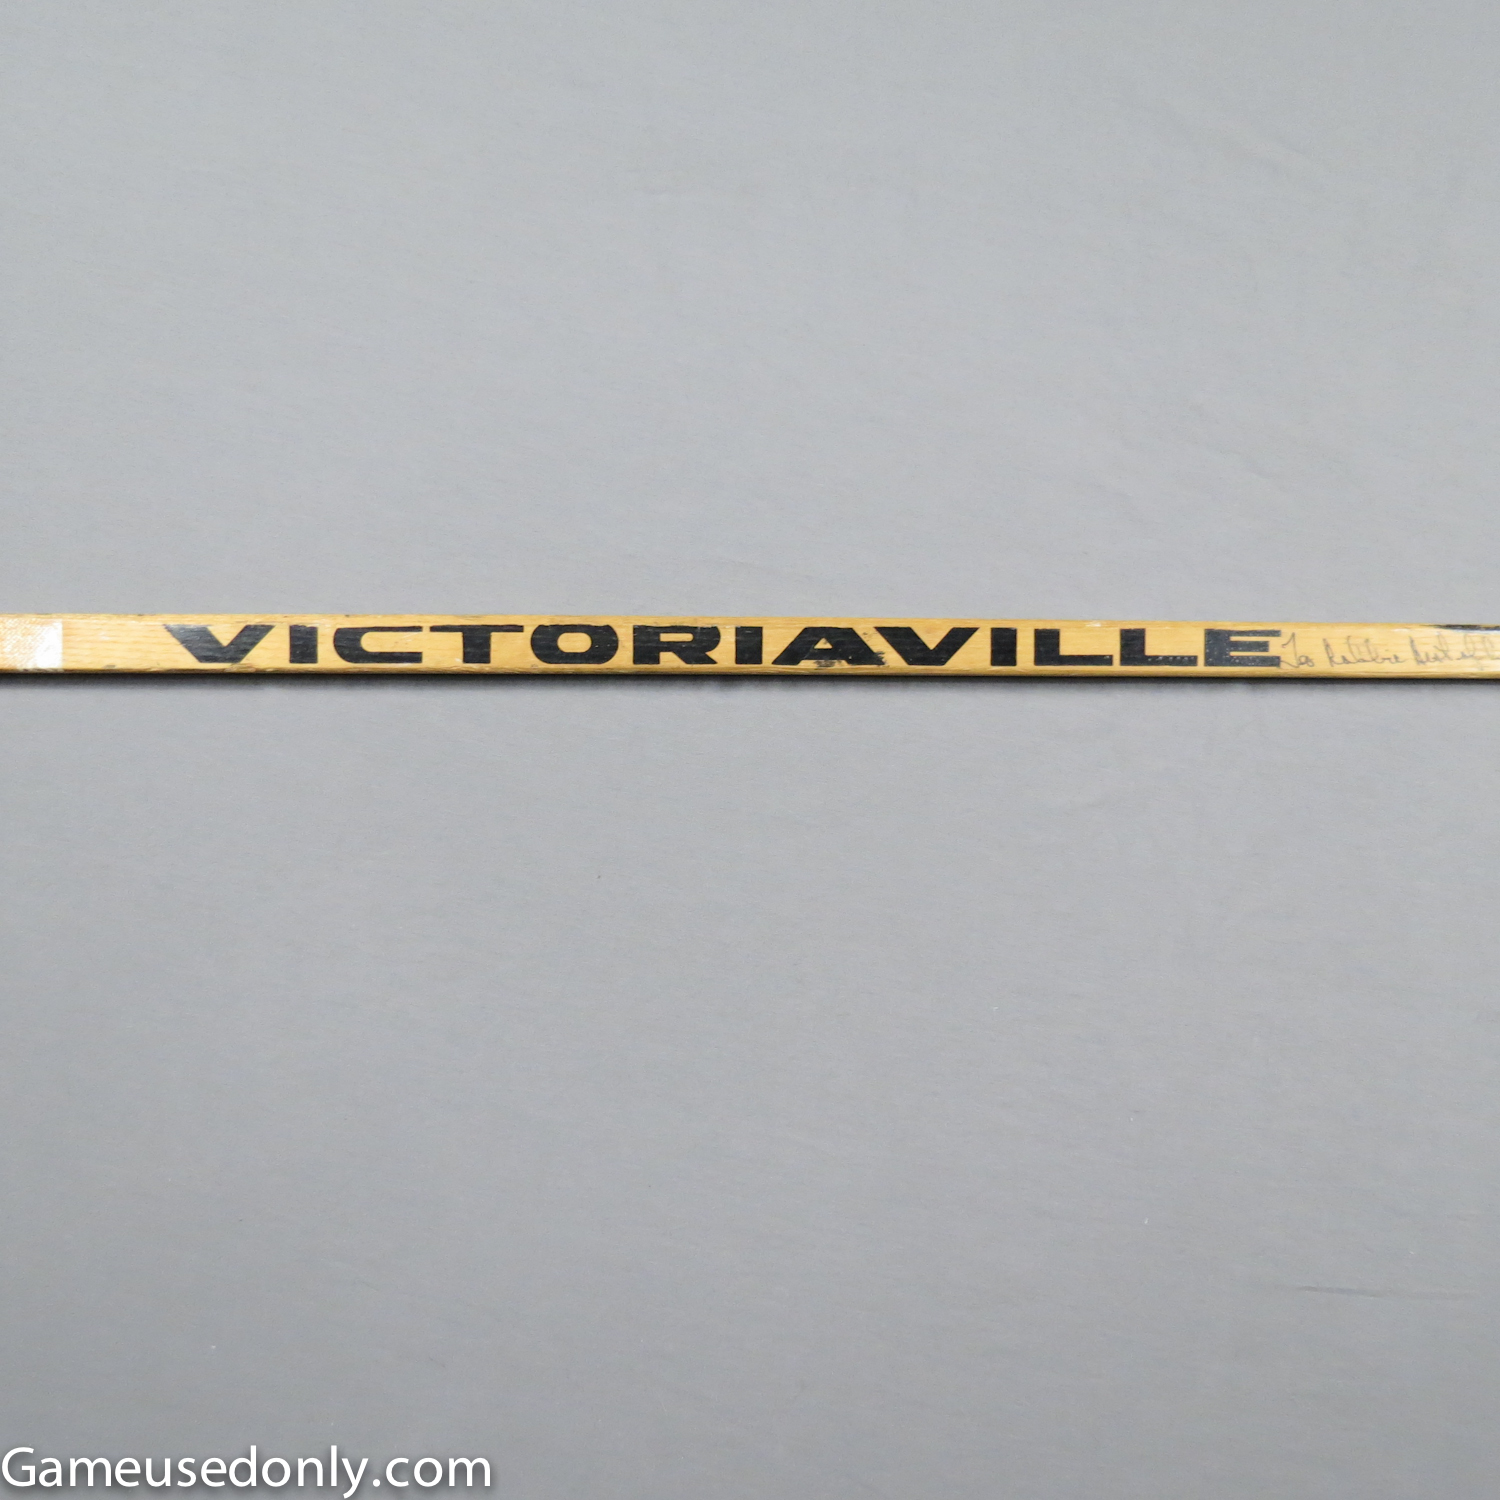 Bobby-Orr-Victoriaville-Game-Used-Stick